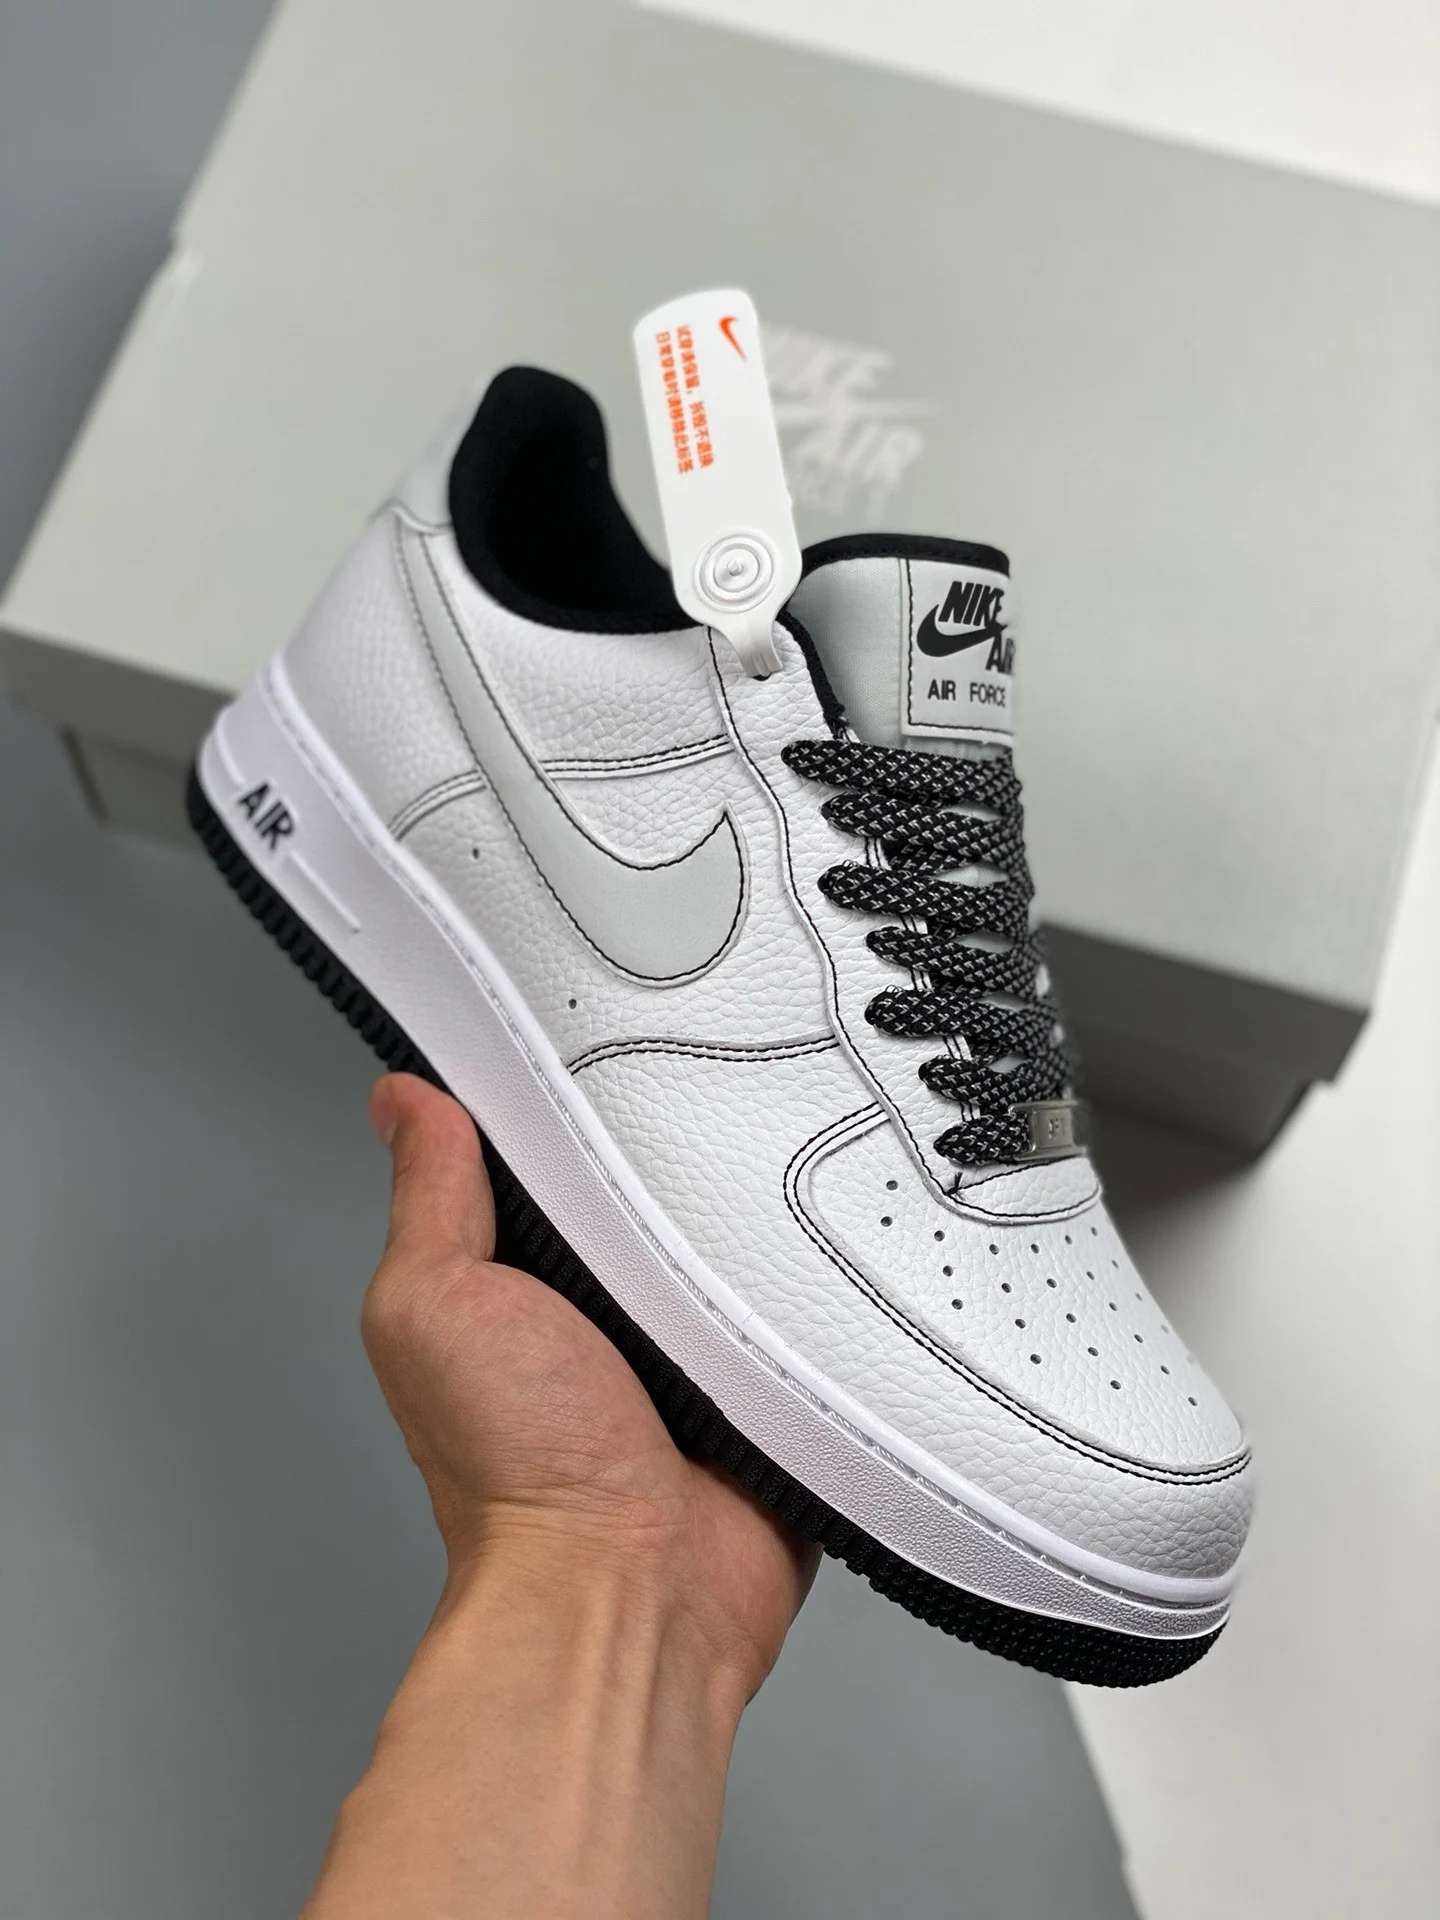 3M x Nike Air Force 1 Low White Black For Sale